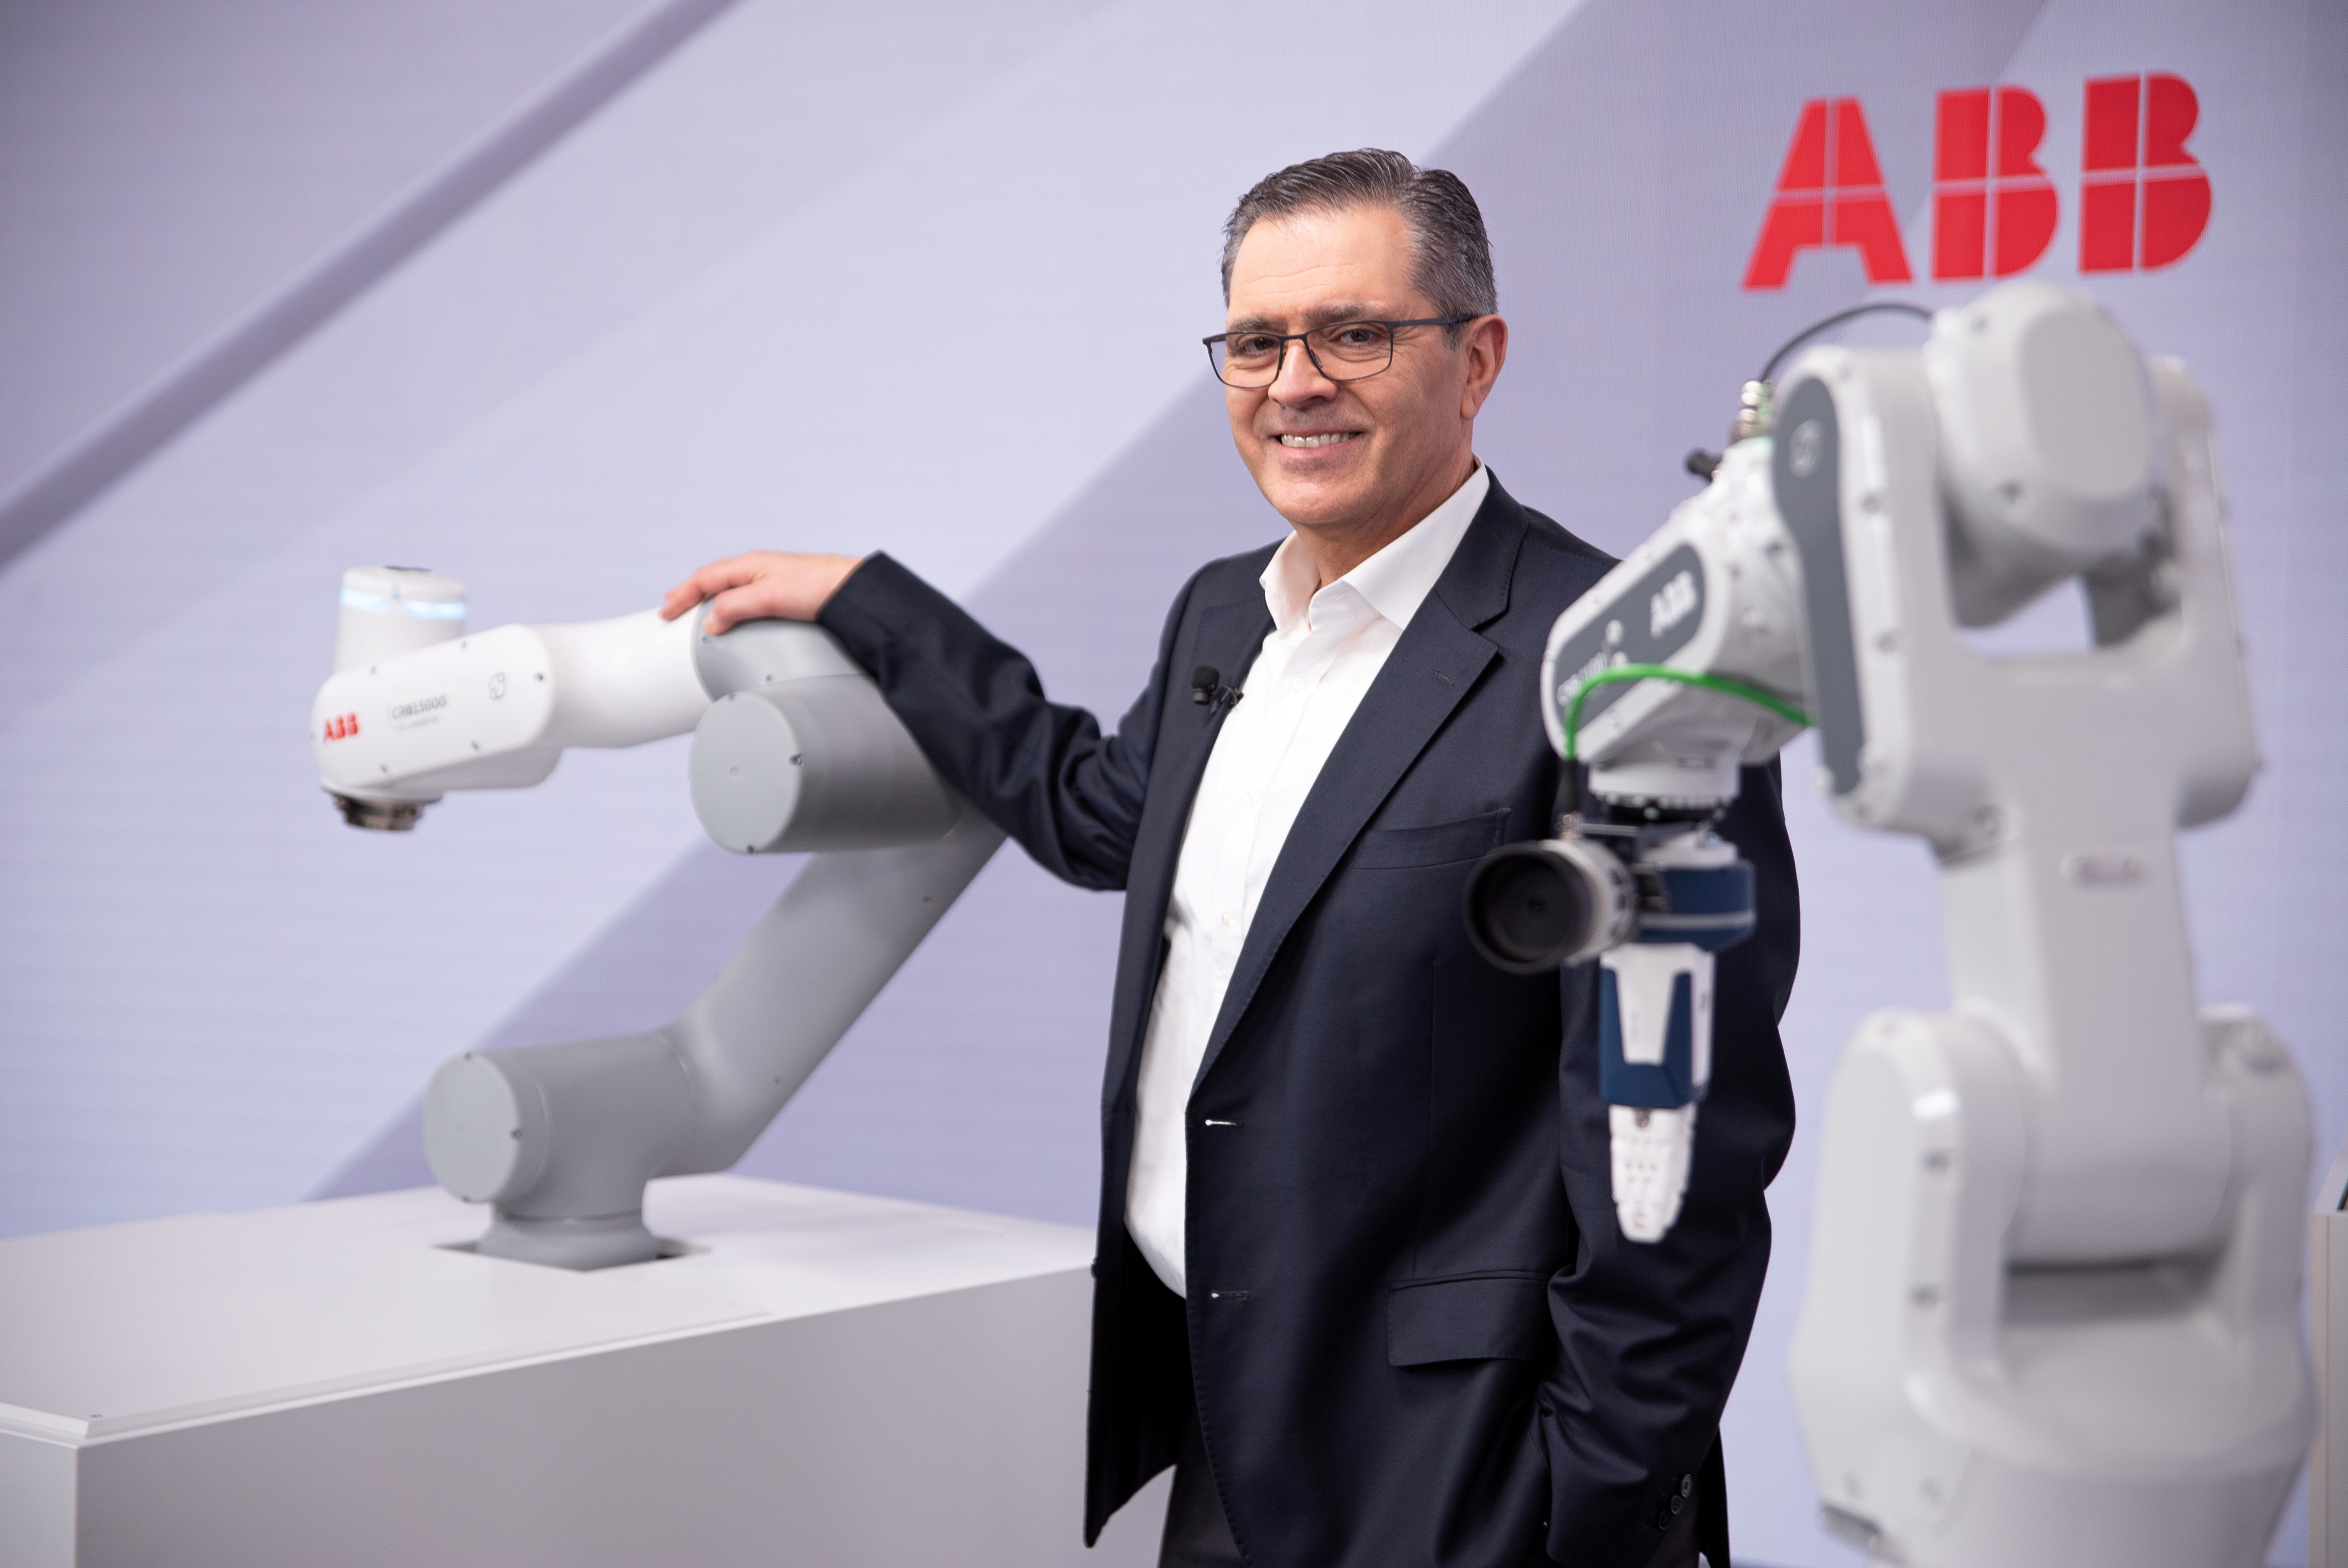 ABB's robots to meet post pandemic demand for workforce that never gets sick |